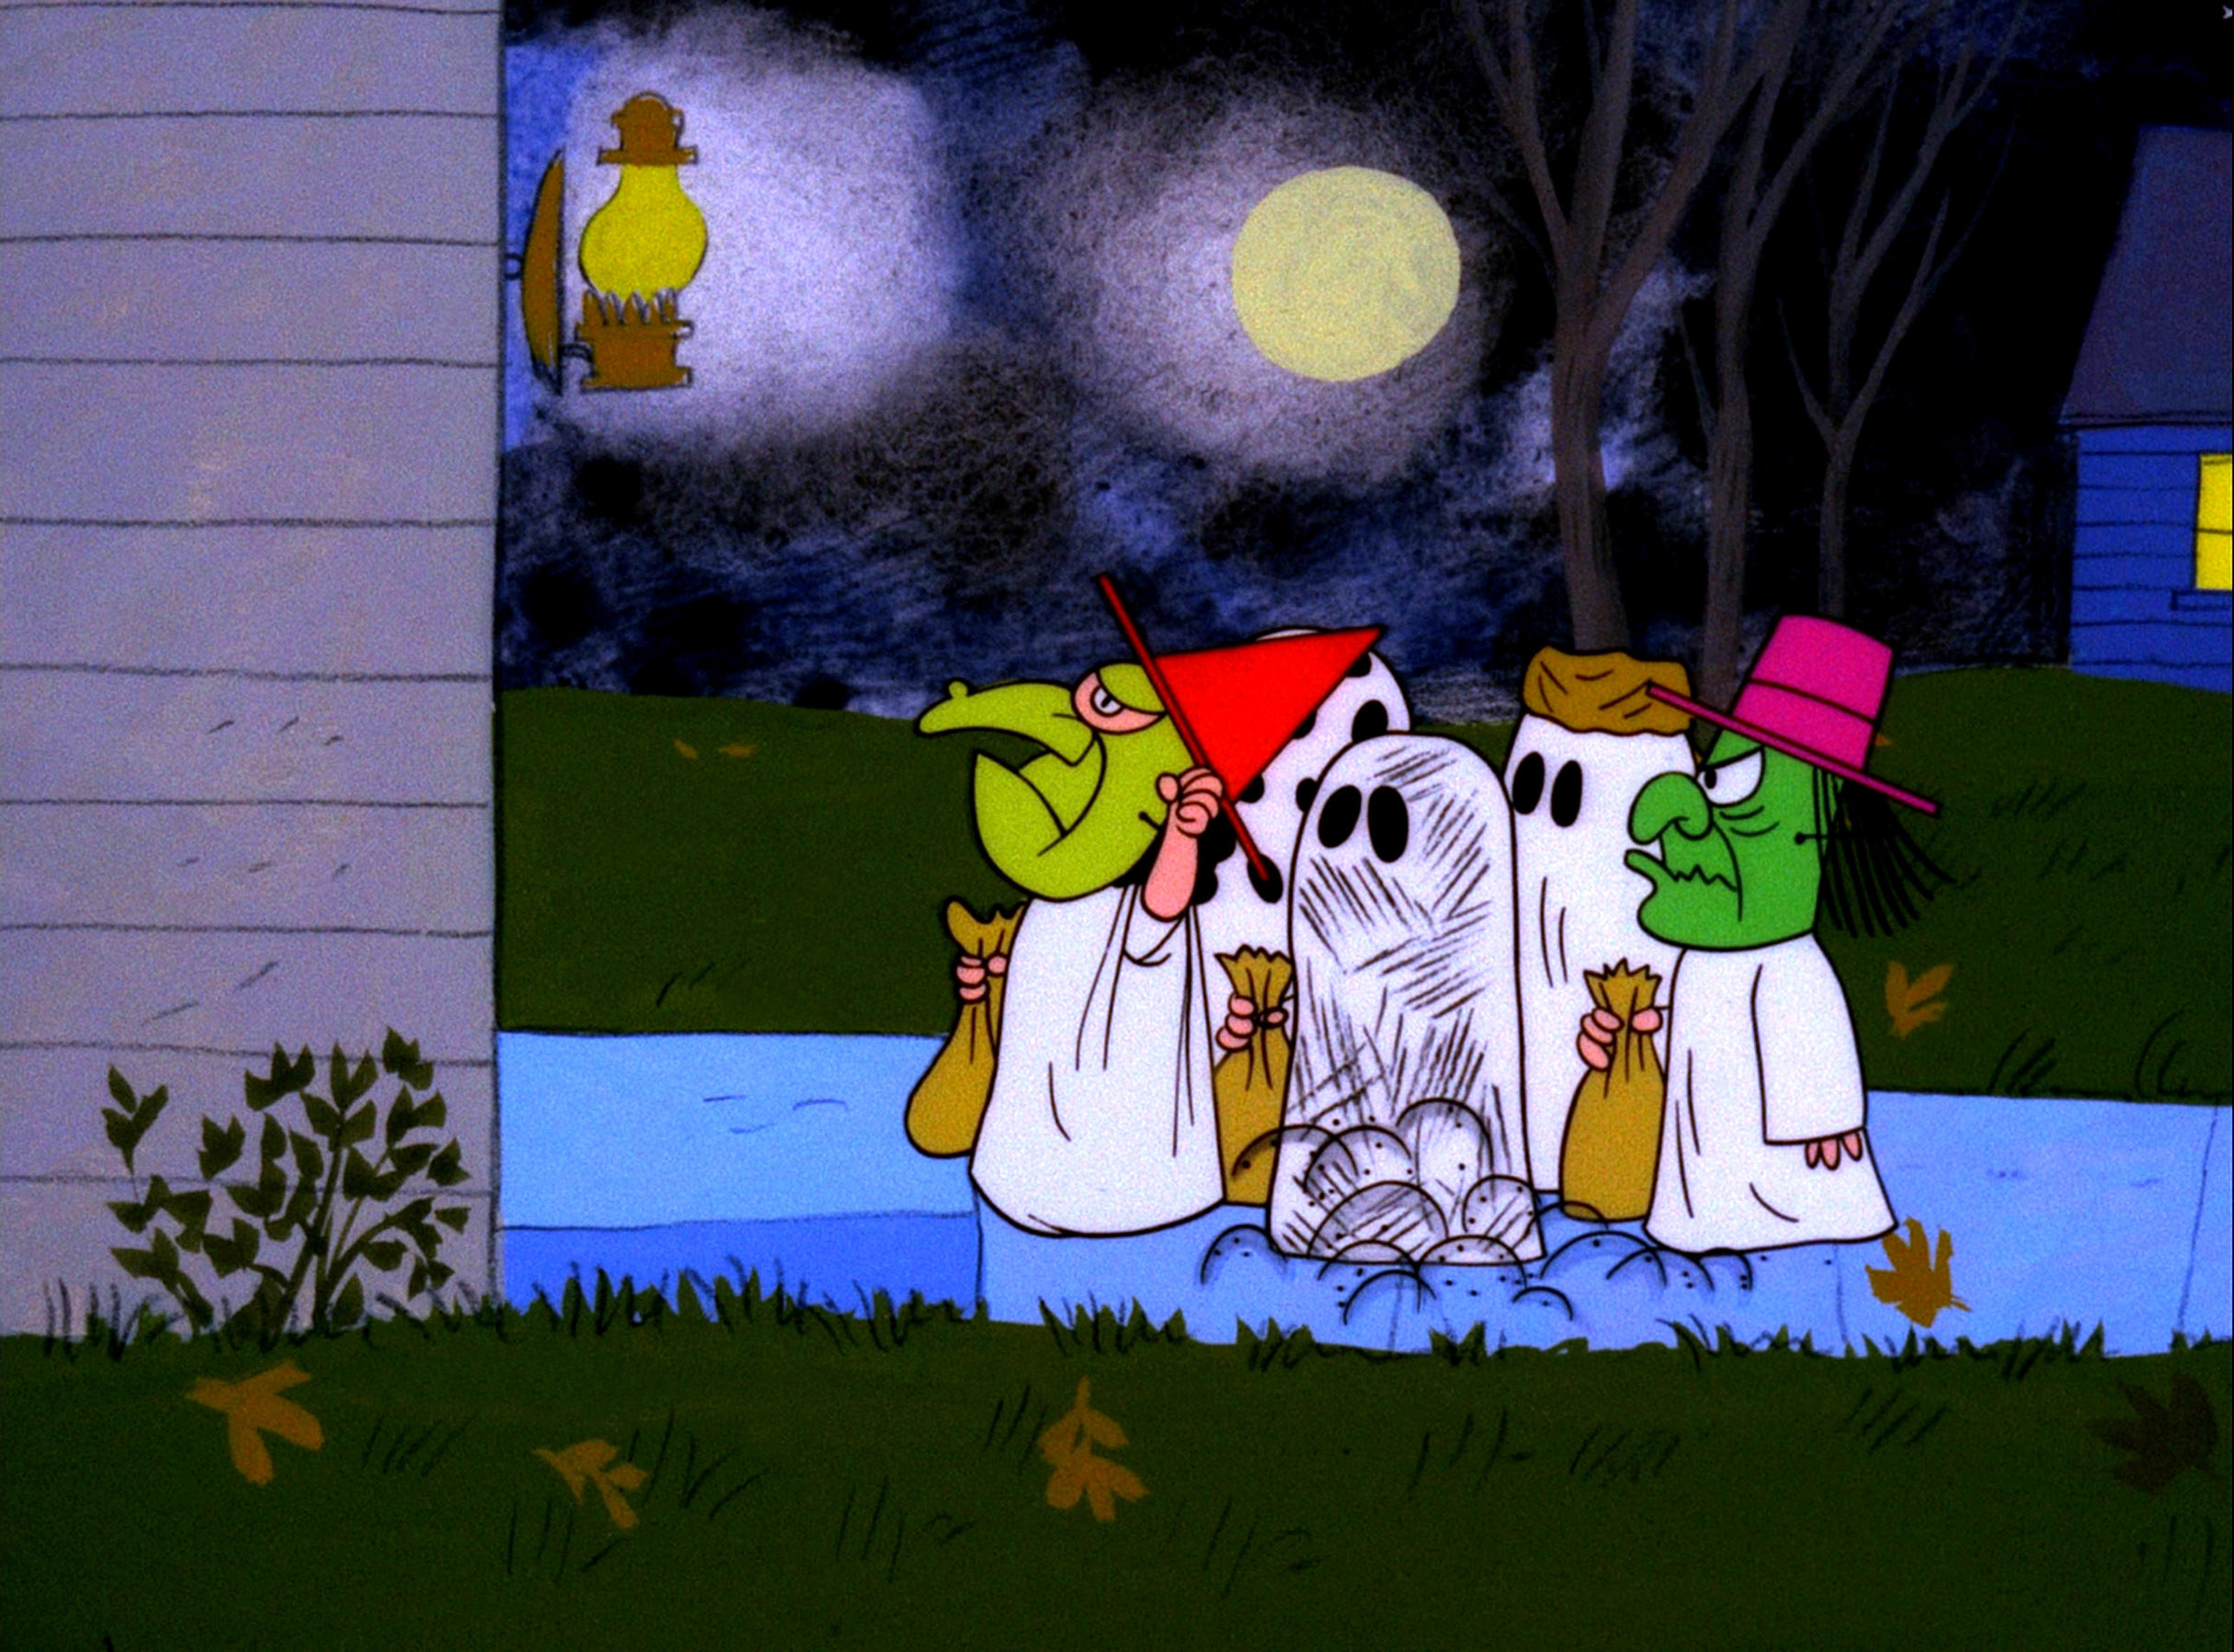 The Peanuts go trick or treating